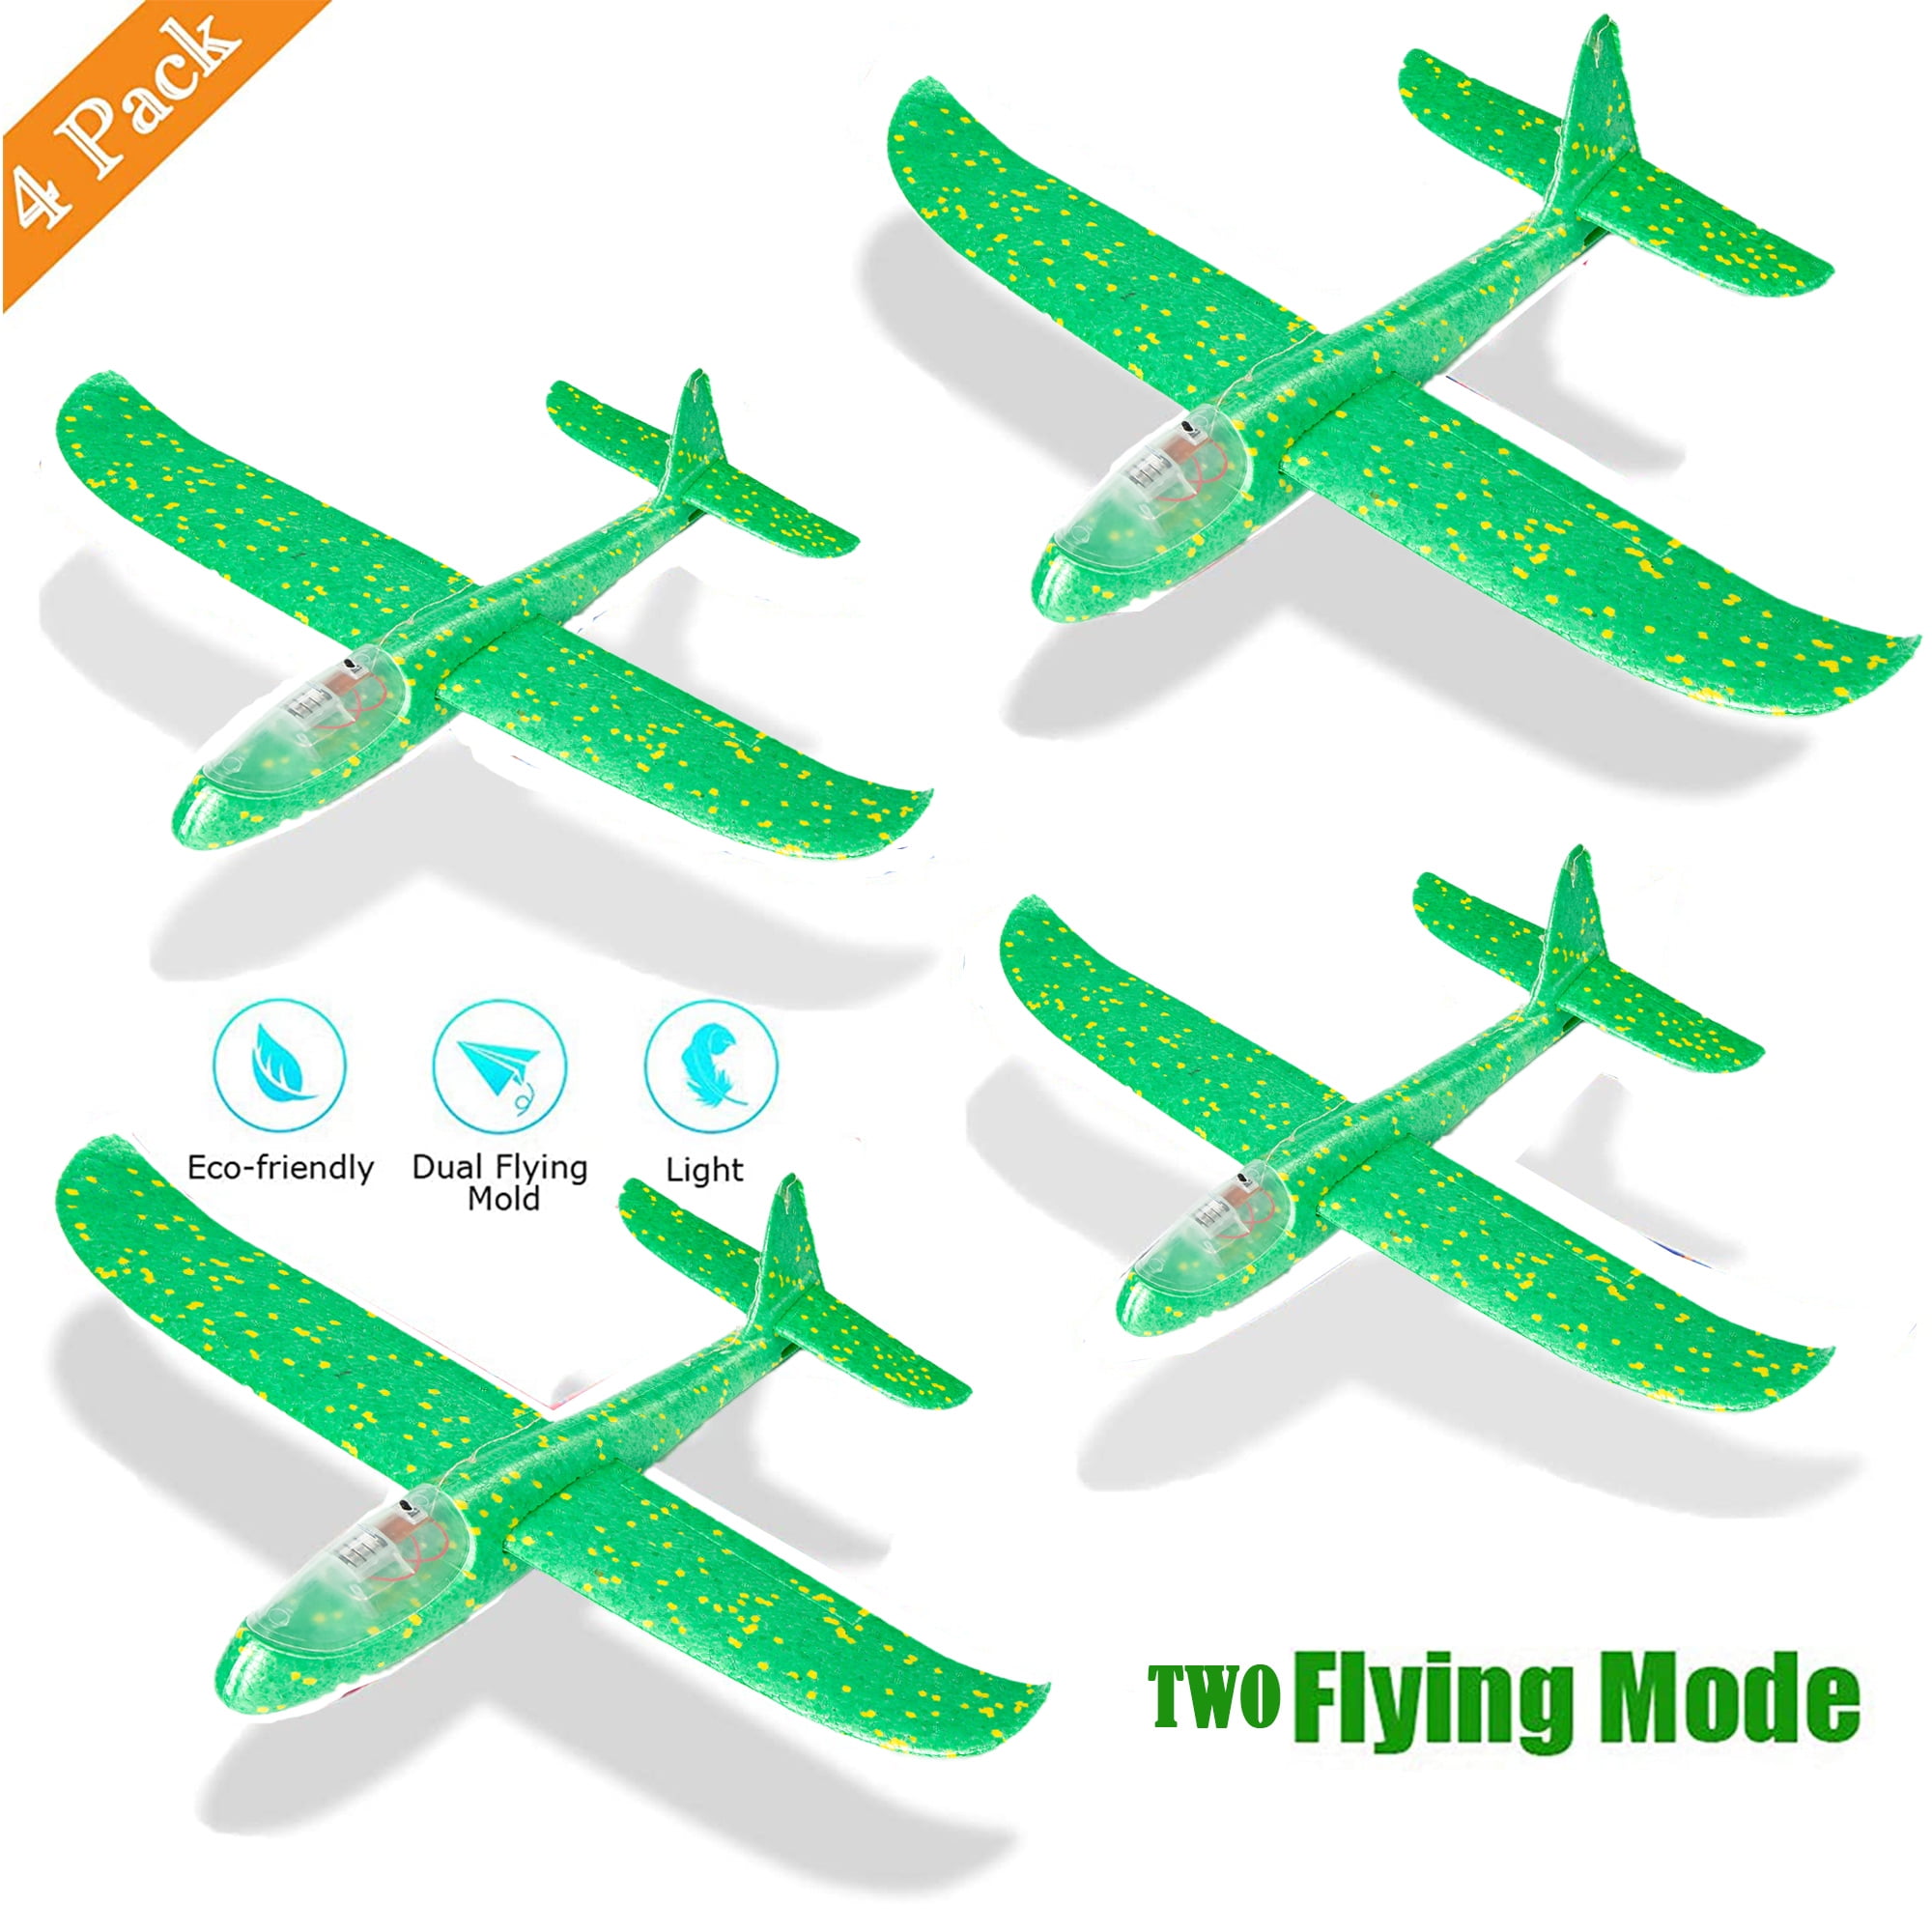 Boys Gift for 3-8 Year Old Boys Airplane Toys for 2-8 Year Old Boys,Glider Plane Foam Airplane Toys for 3-8 Year Old